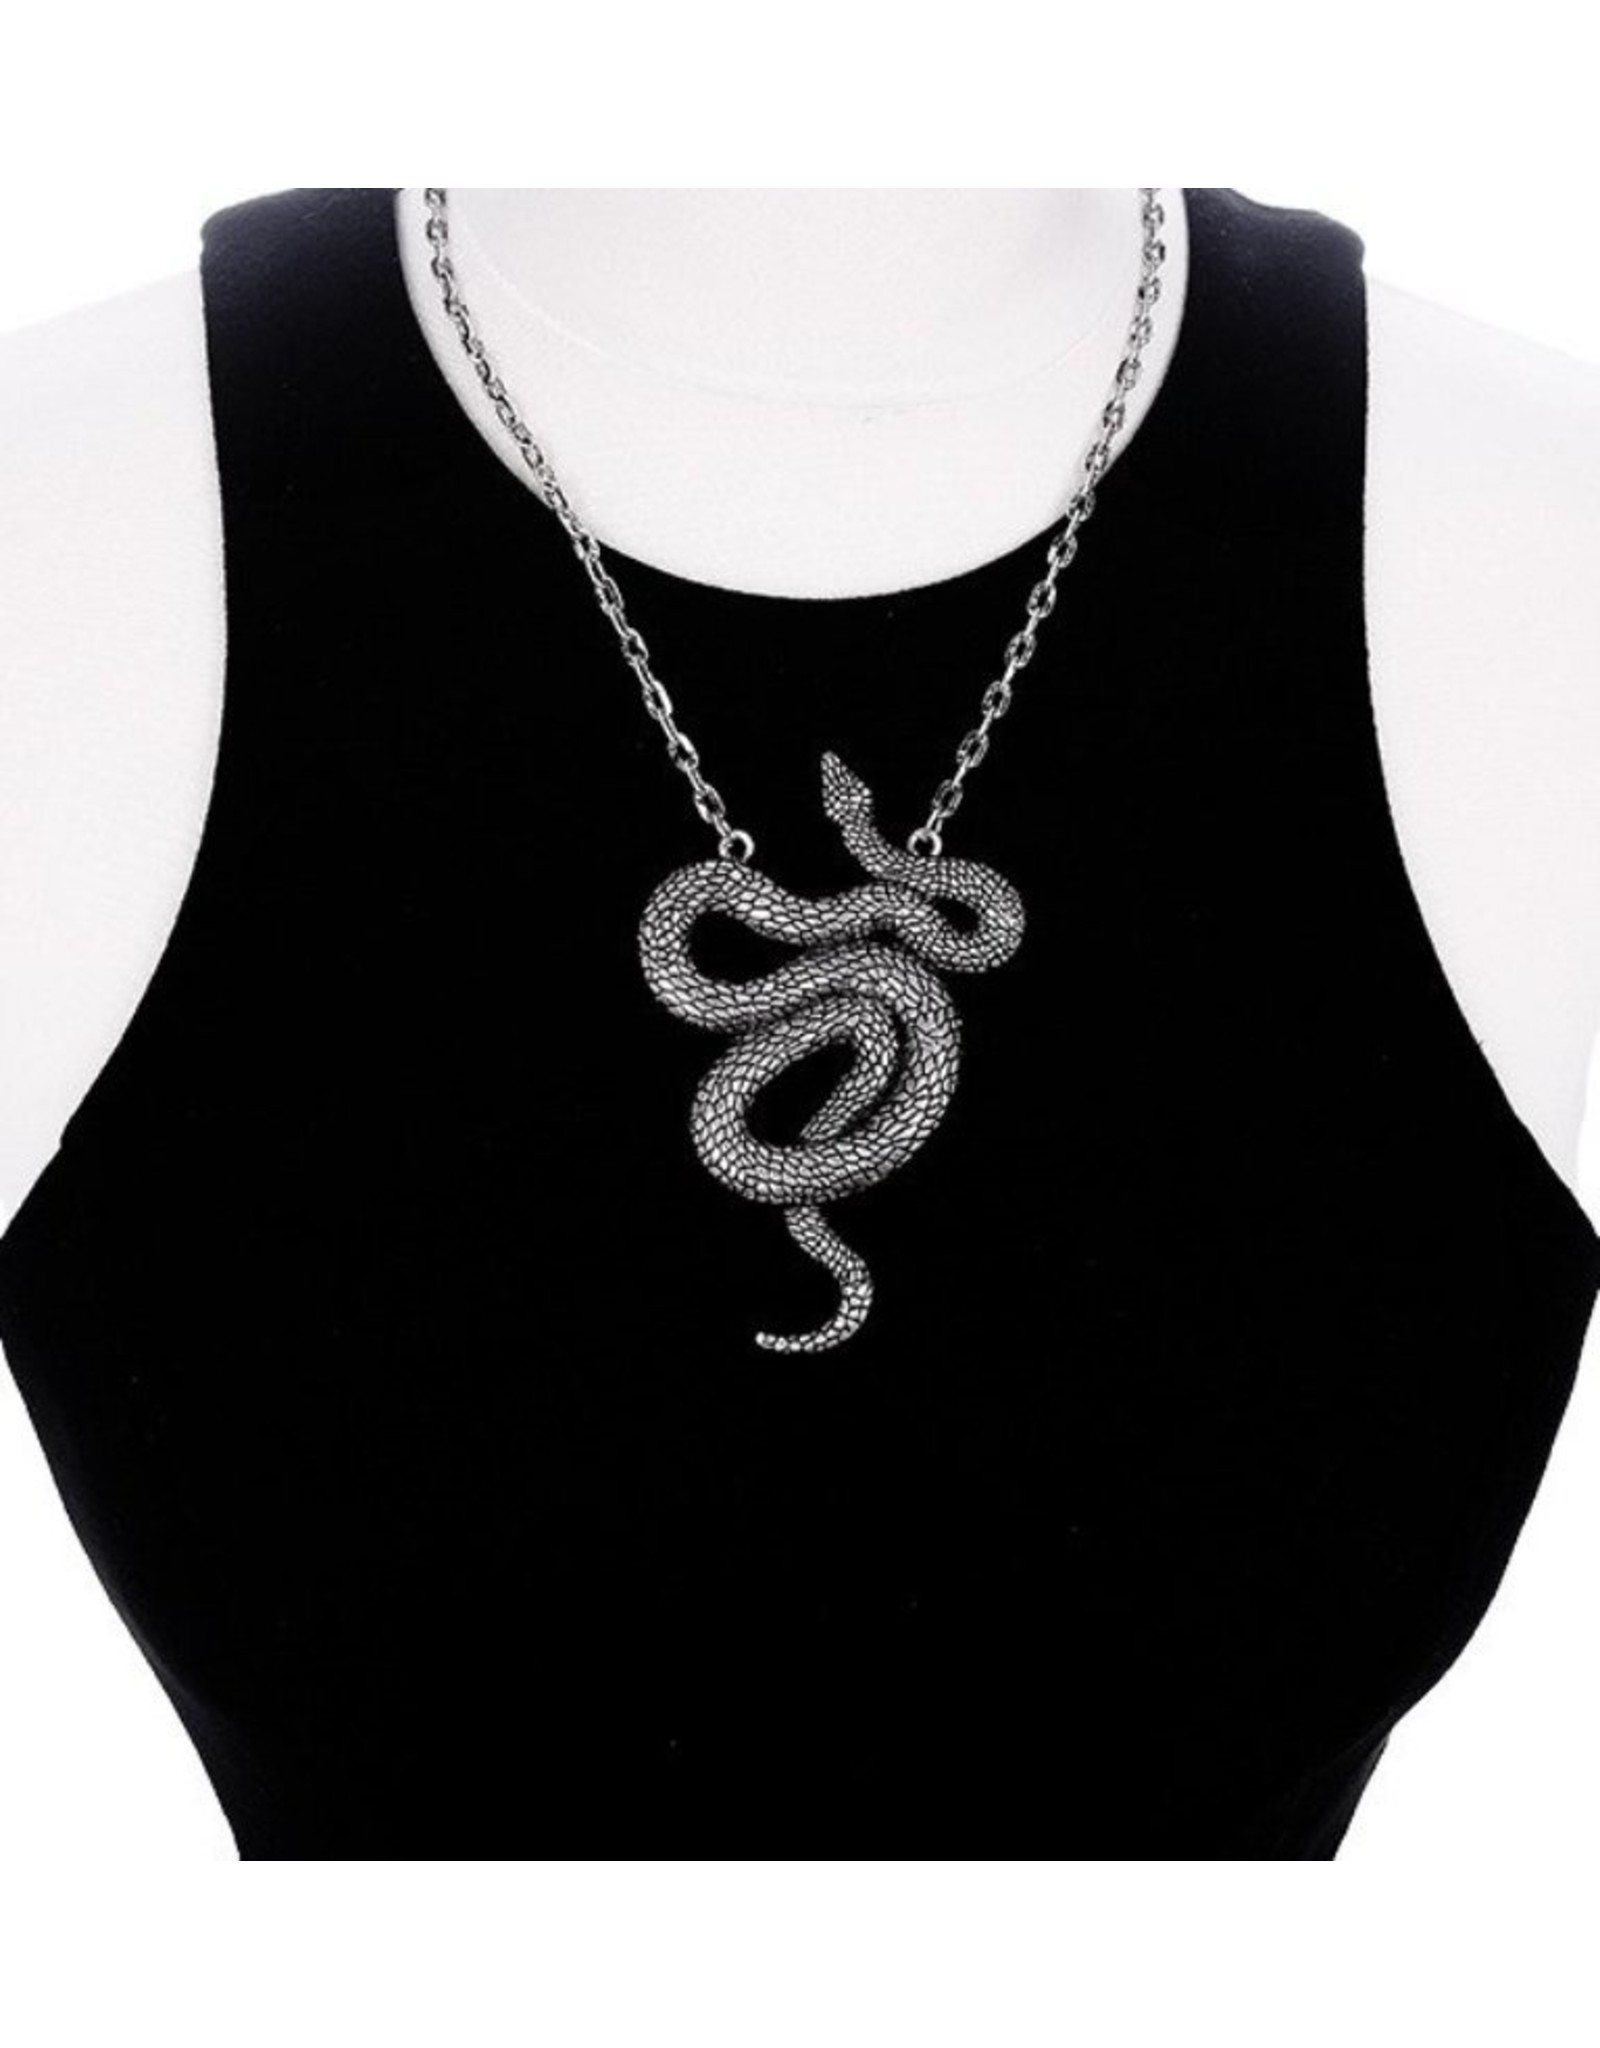 Restyle Gothic jewellery Steampunk jewellery - Necklace with pendant Snake - Restyle